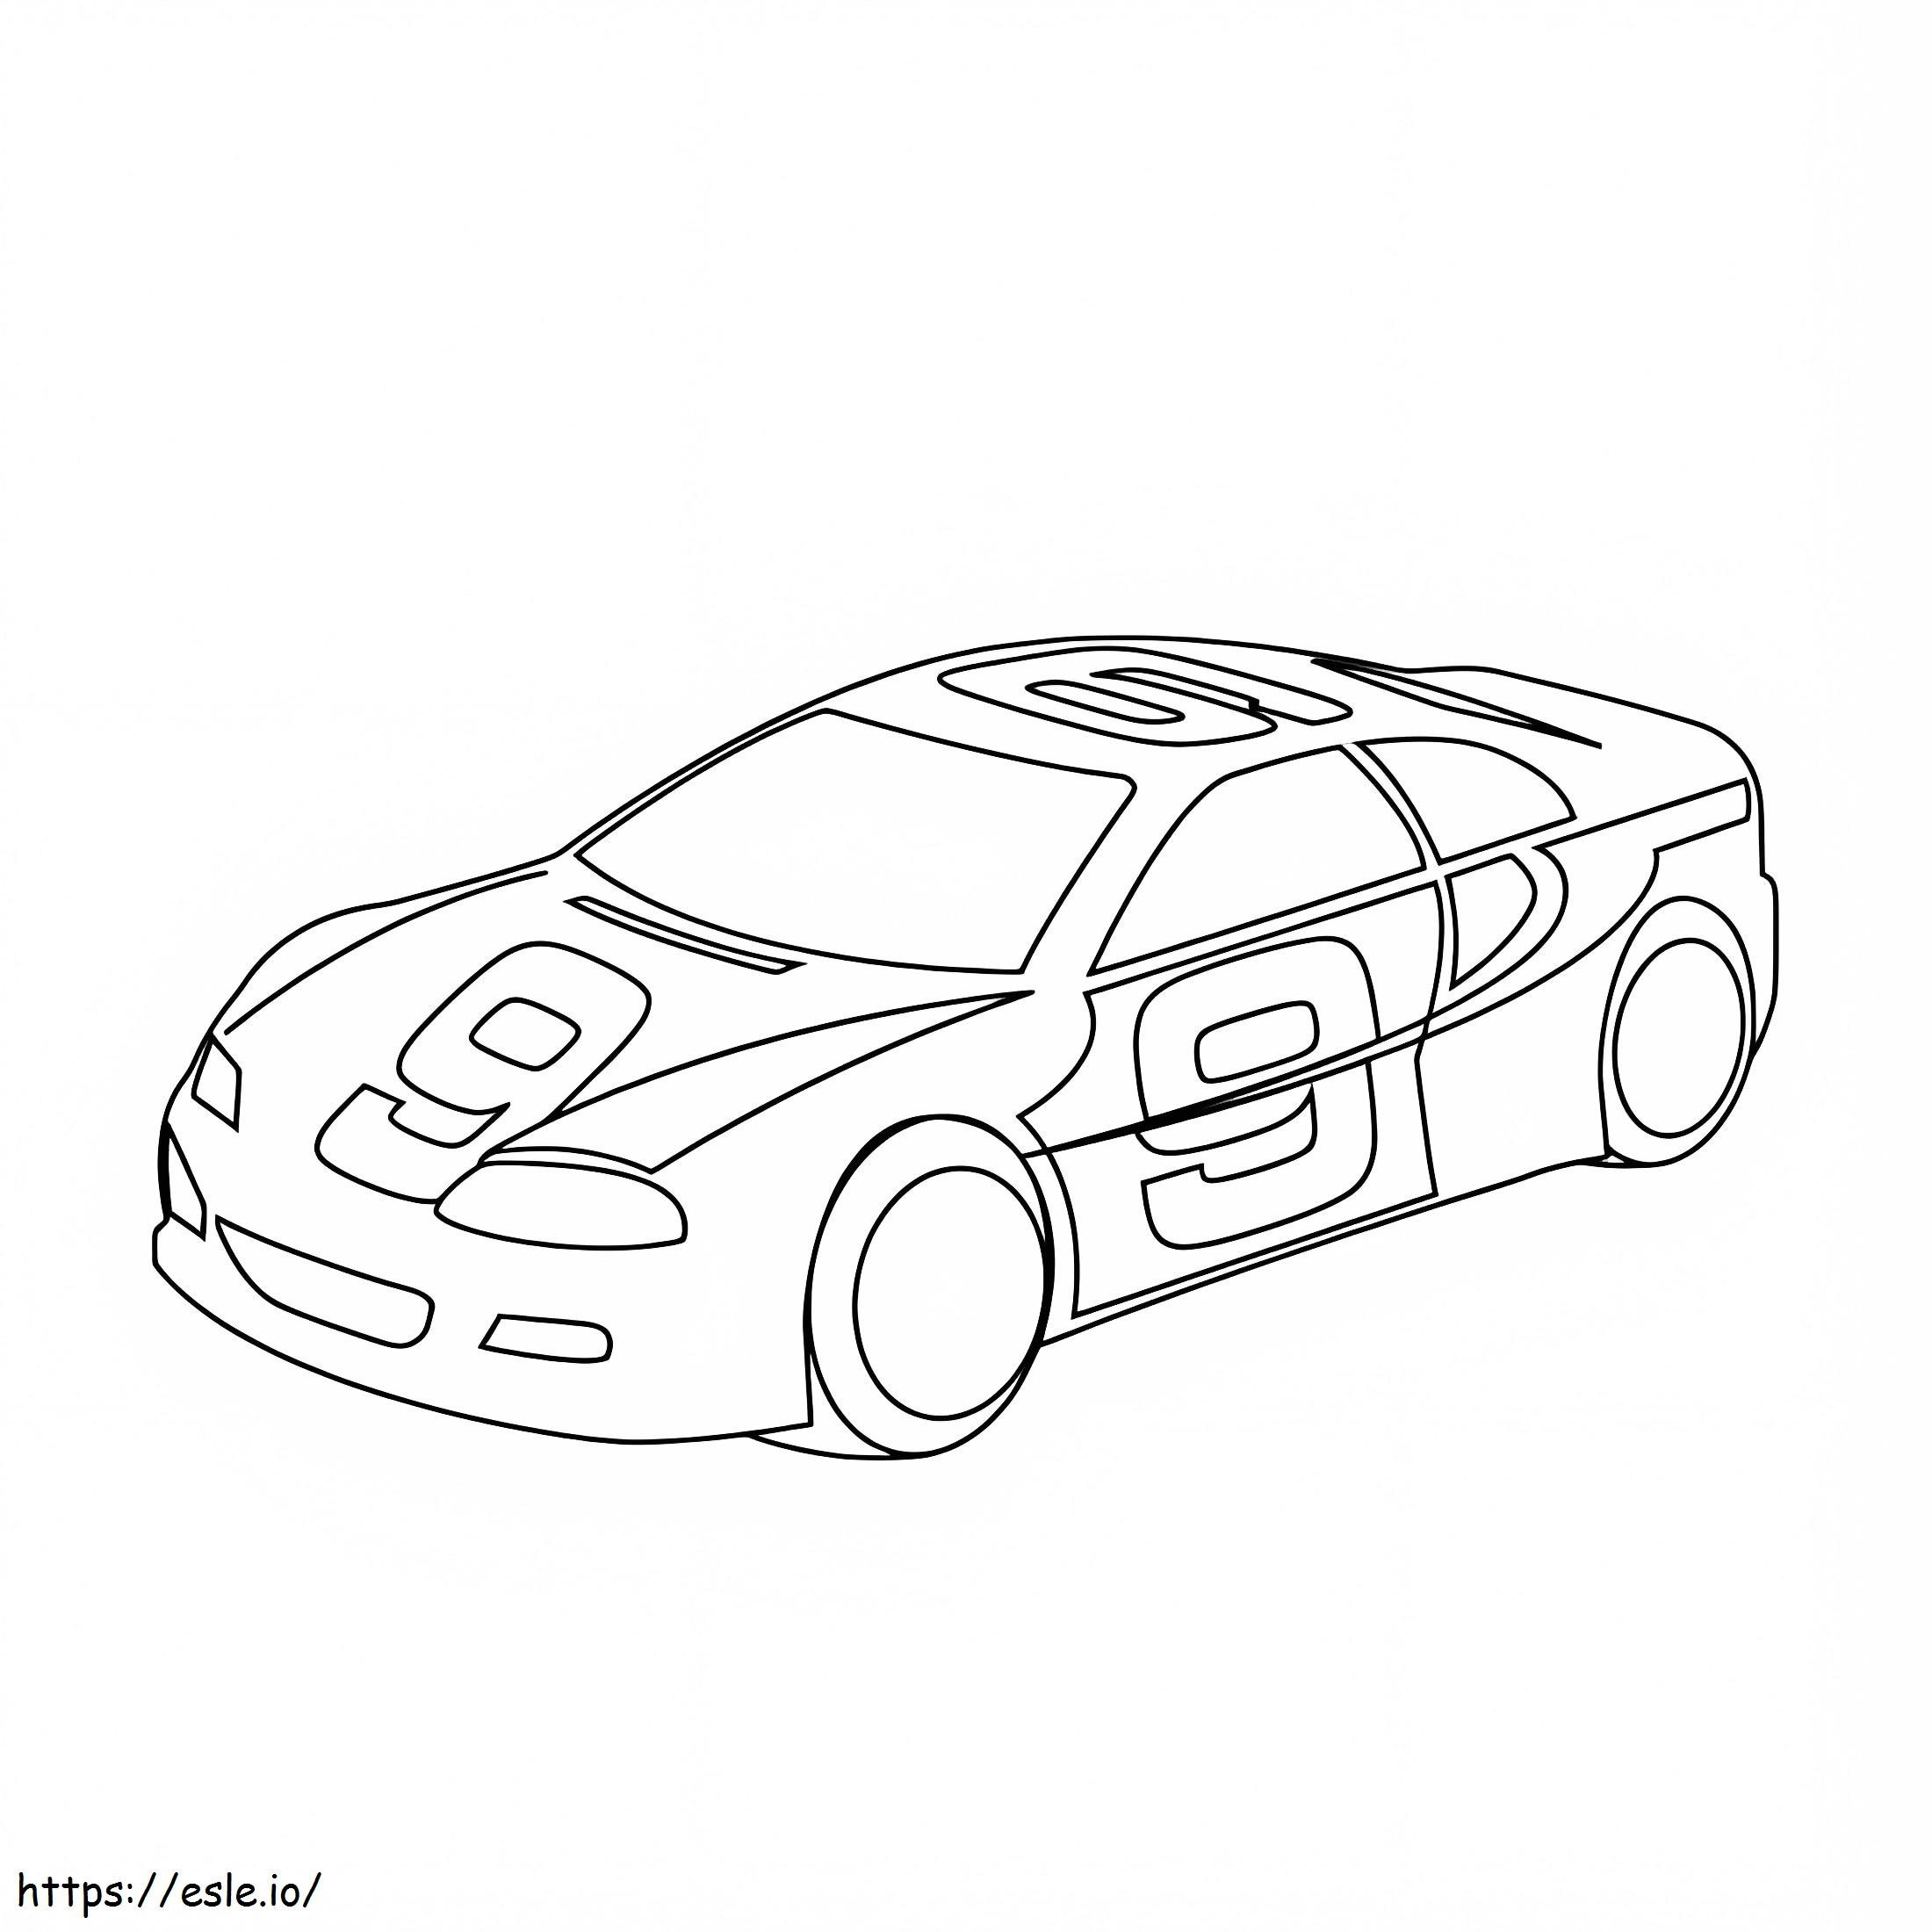 Racing Car 6 coloring page